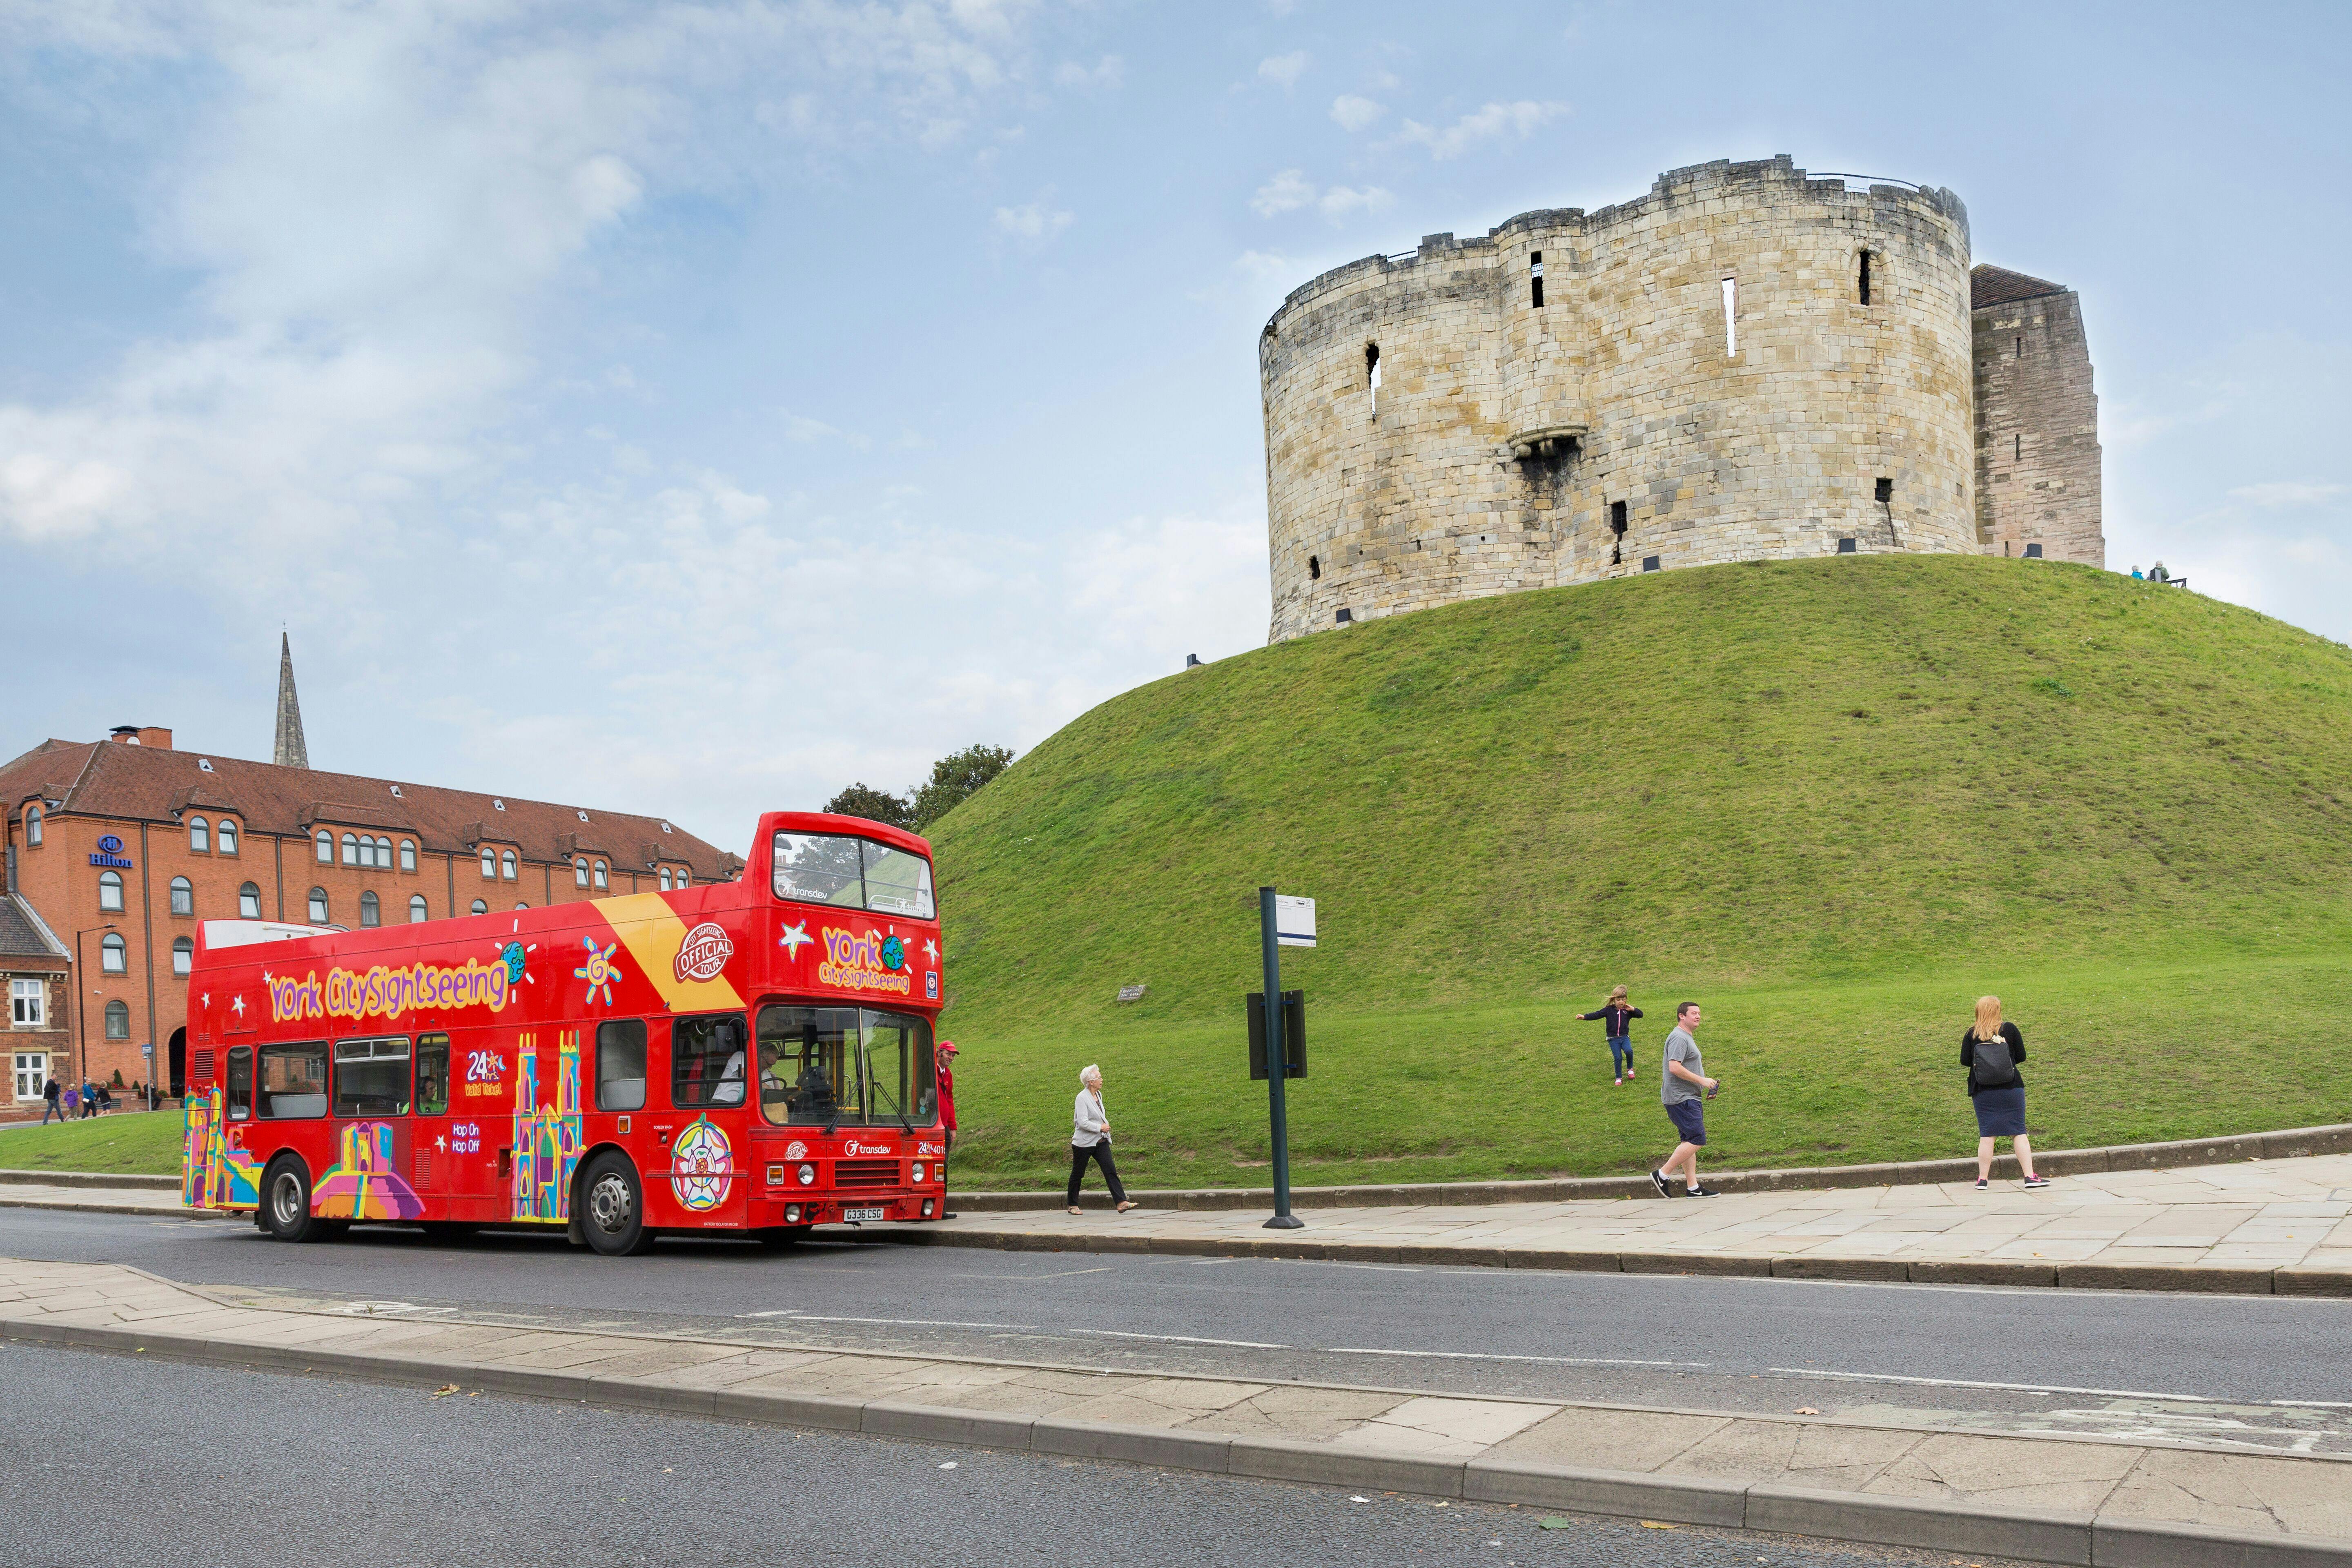 24-hour hop-on hop-off City Sightseeing bus tour of York